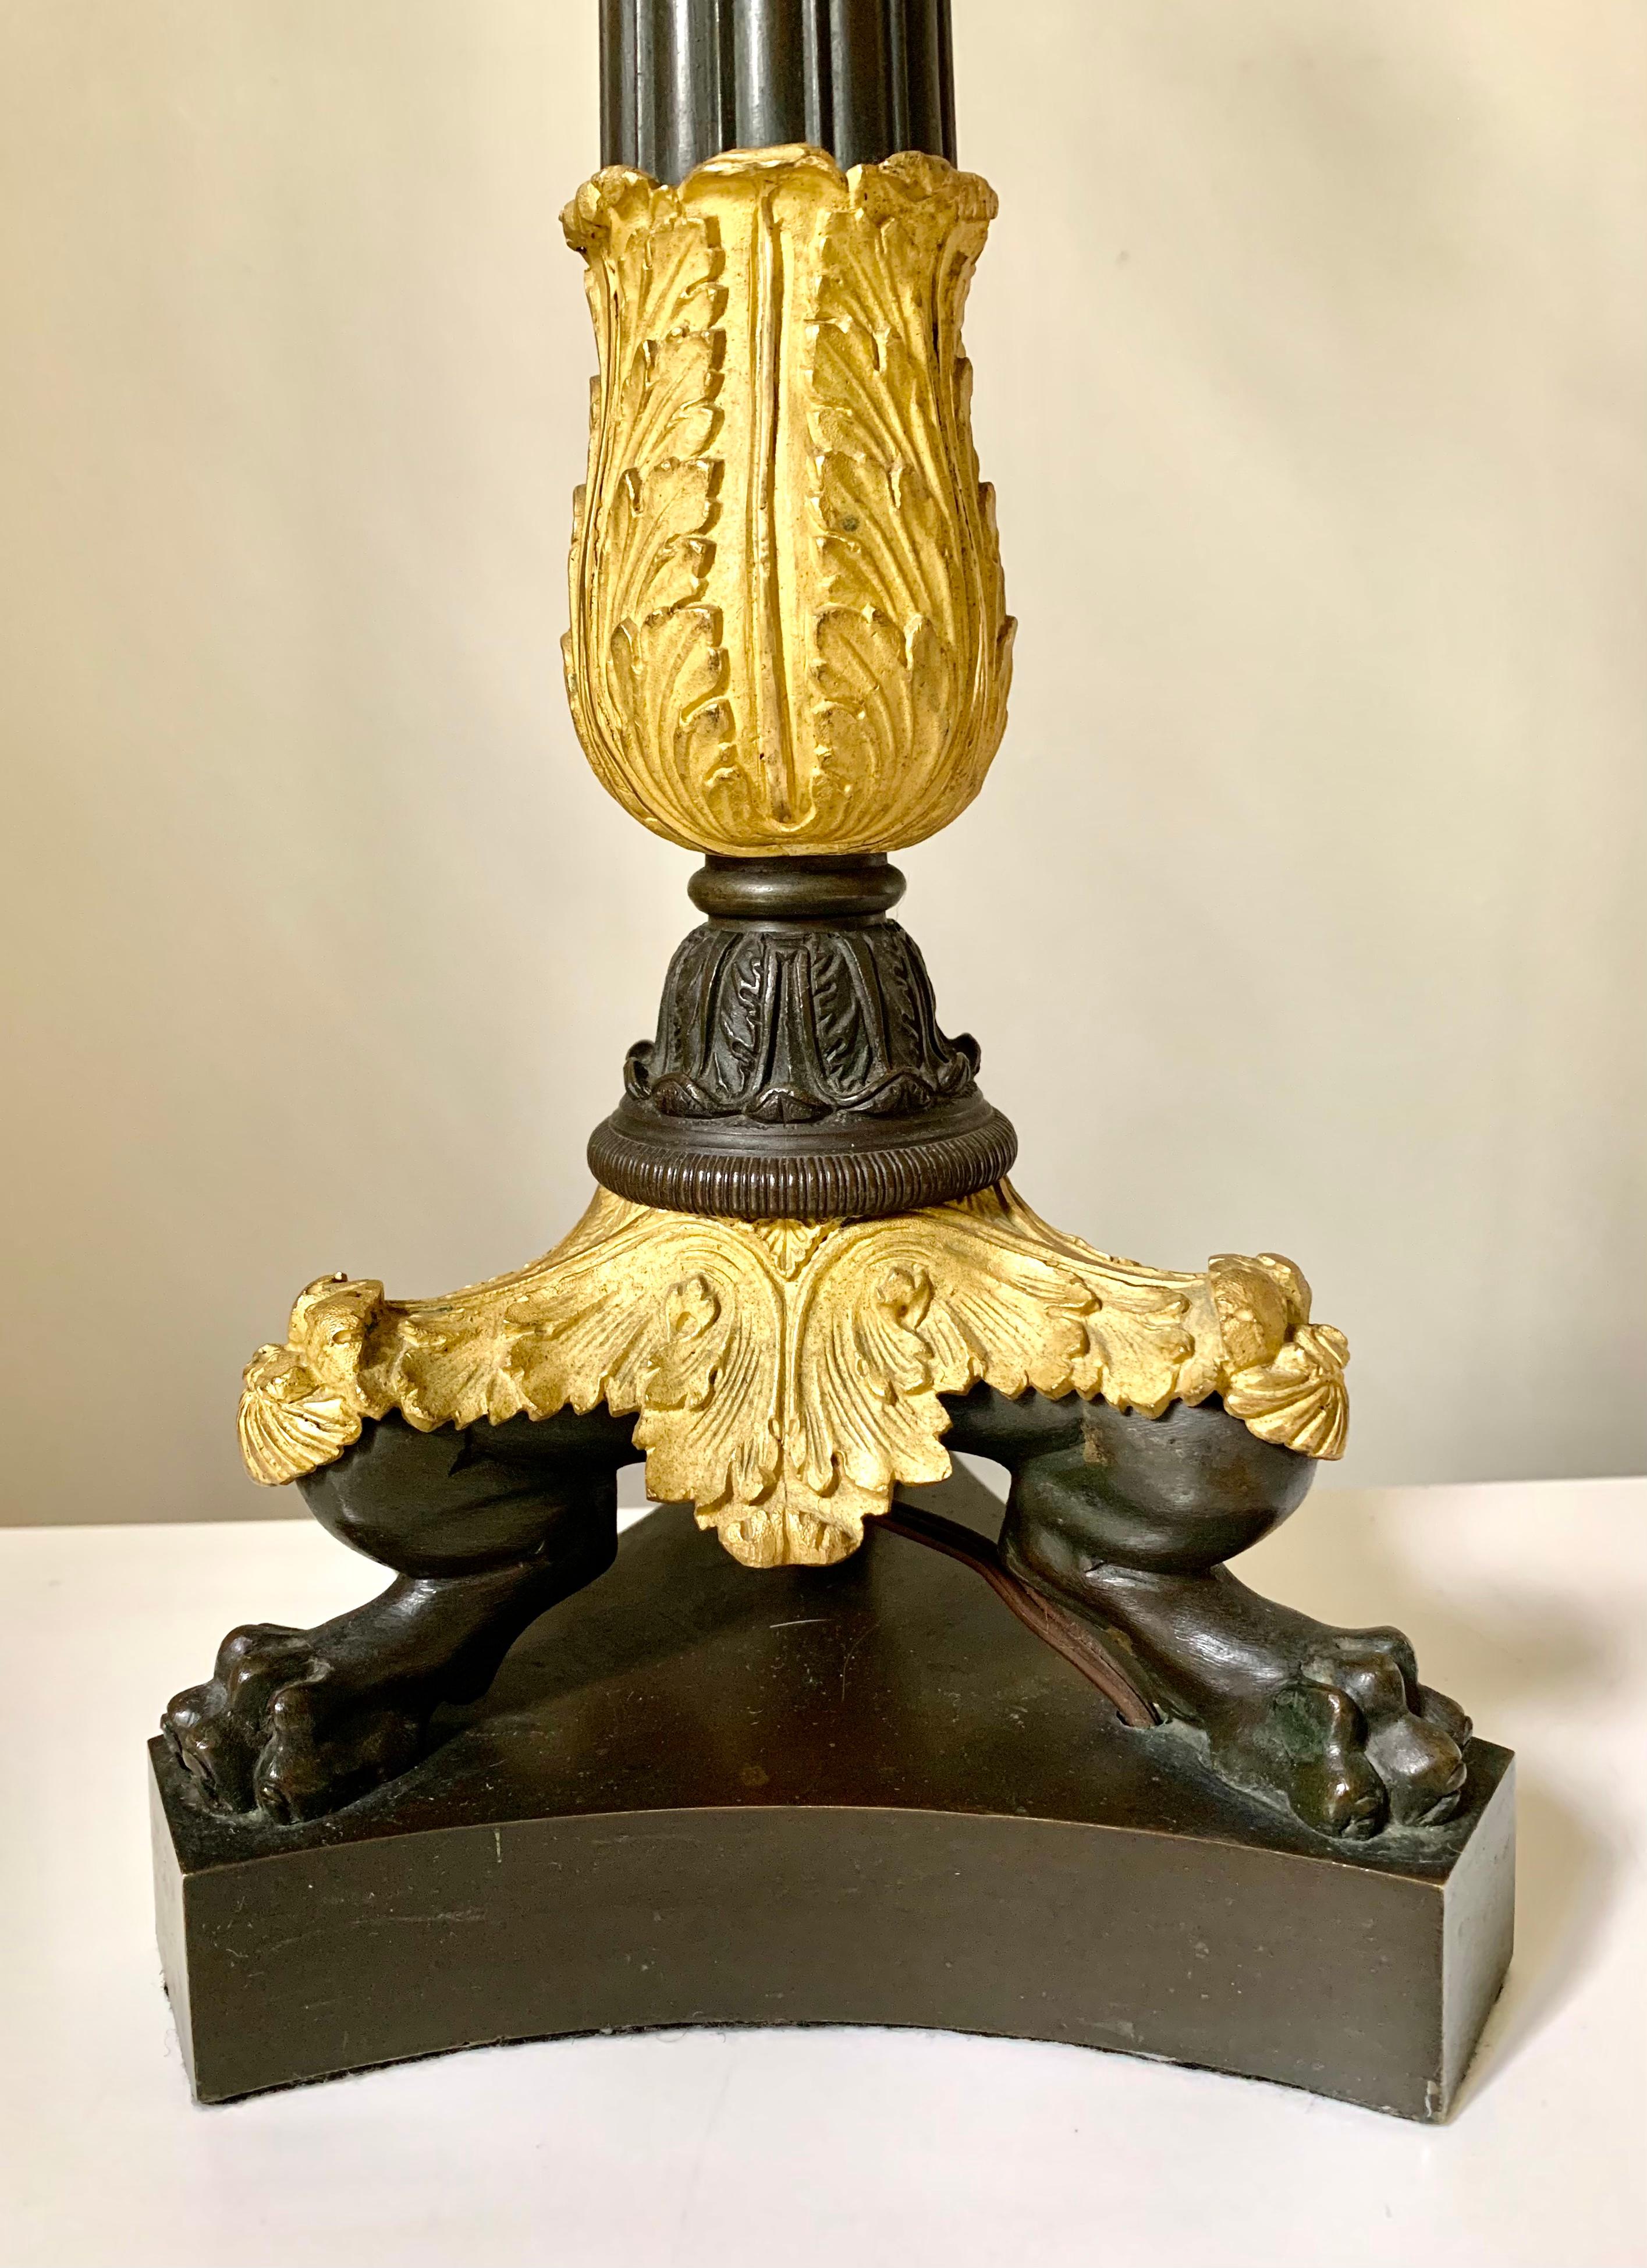 Fine quality pair of Charles X period gilt and patinated bronze candelabra lamps. Each having a central hand chiselled gilt bronze candle stem decorated with quatrefoil four leaf clover elements against a hand hammered background, topped by stylized